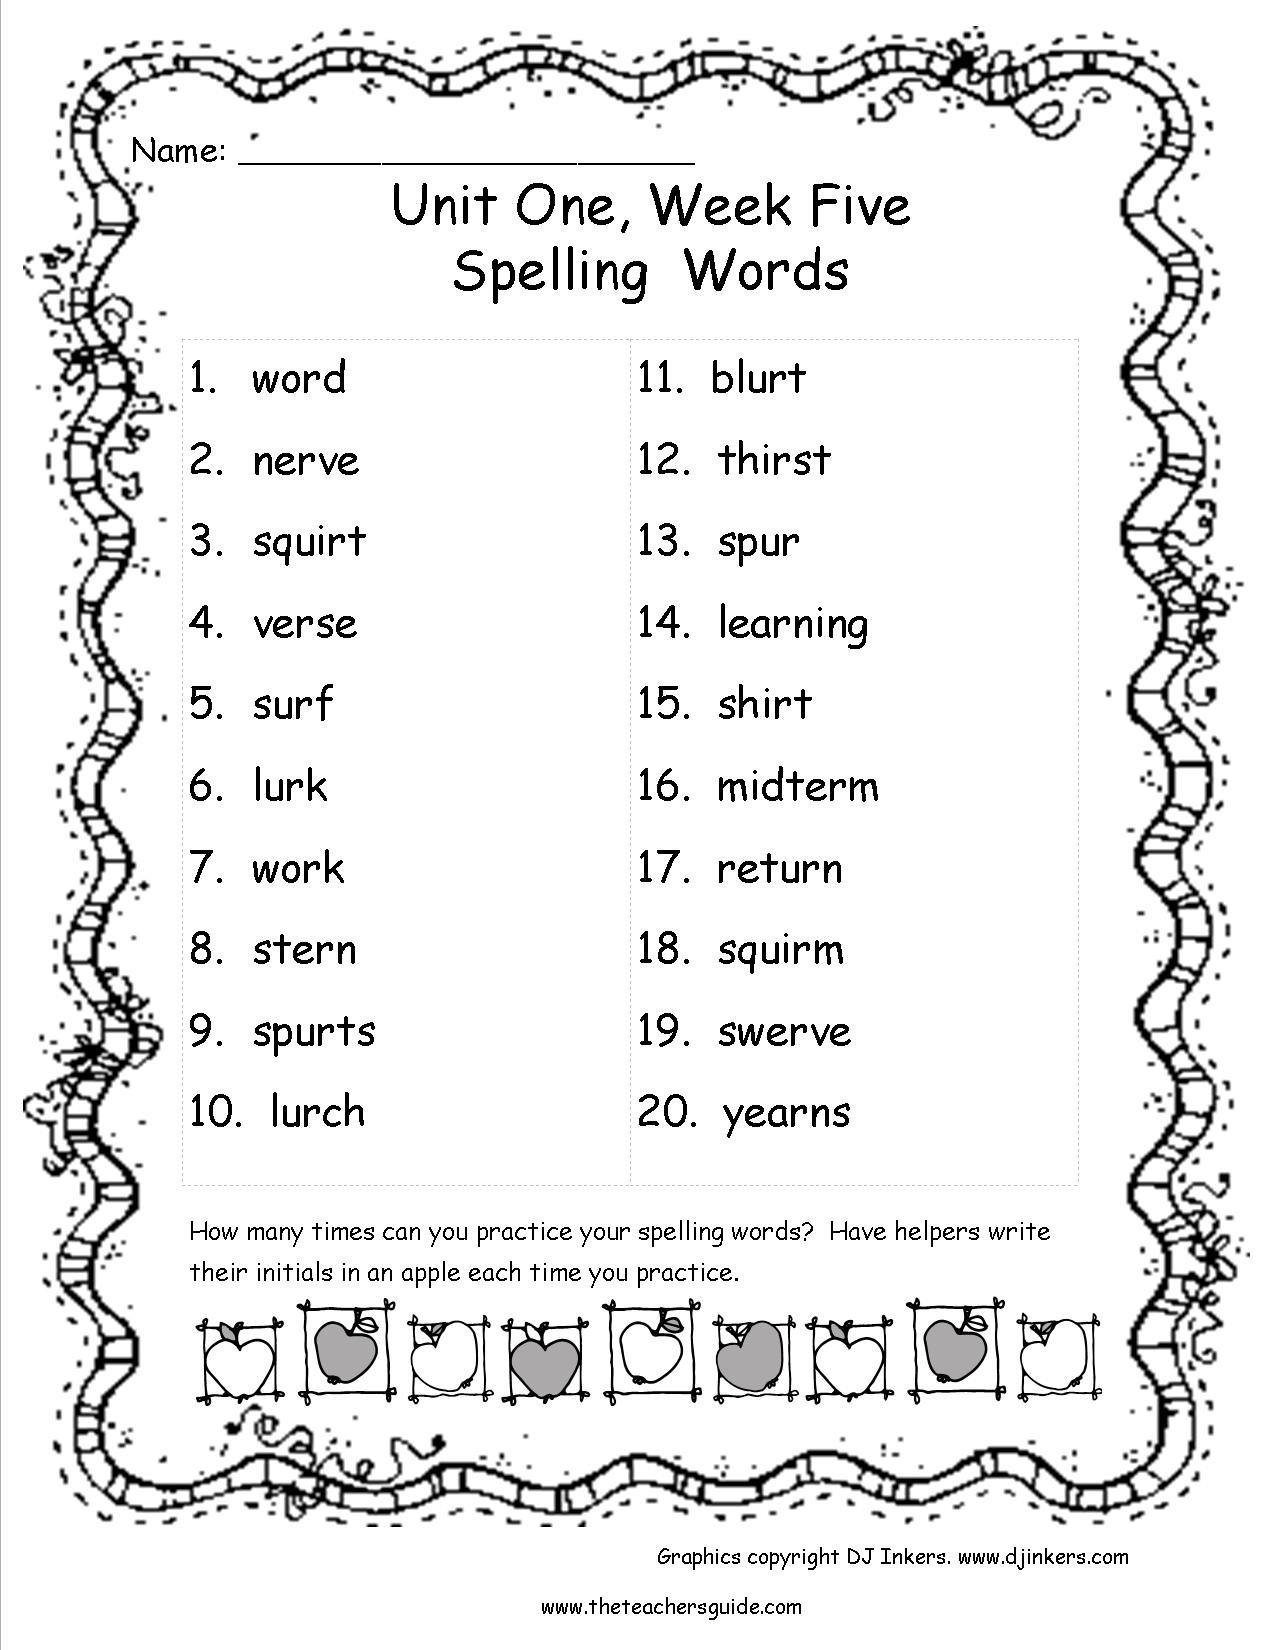 Spelling Lists For 5th Grade